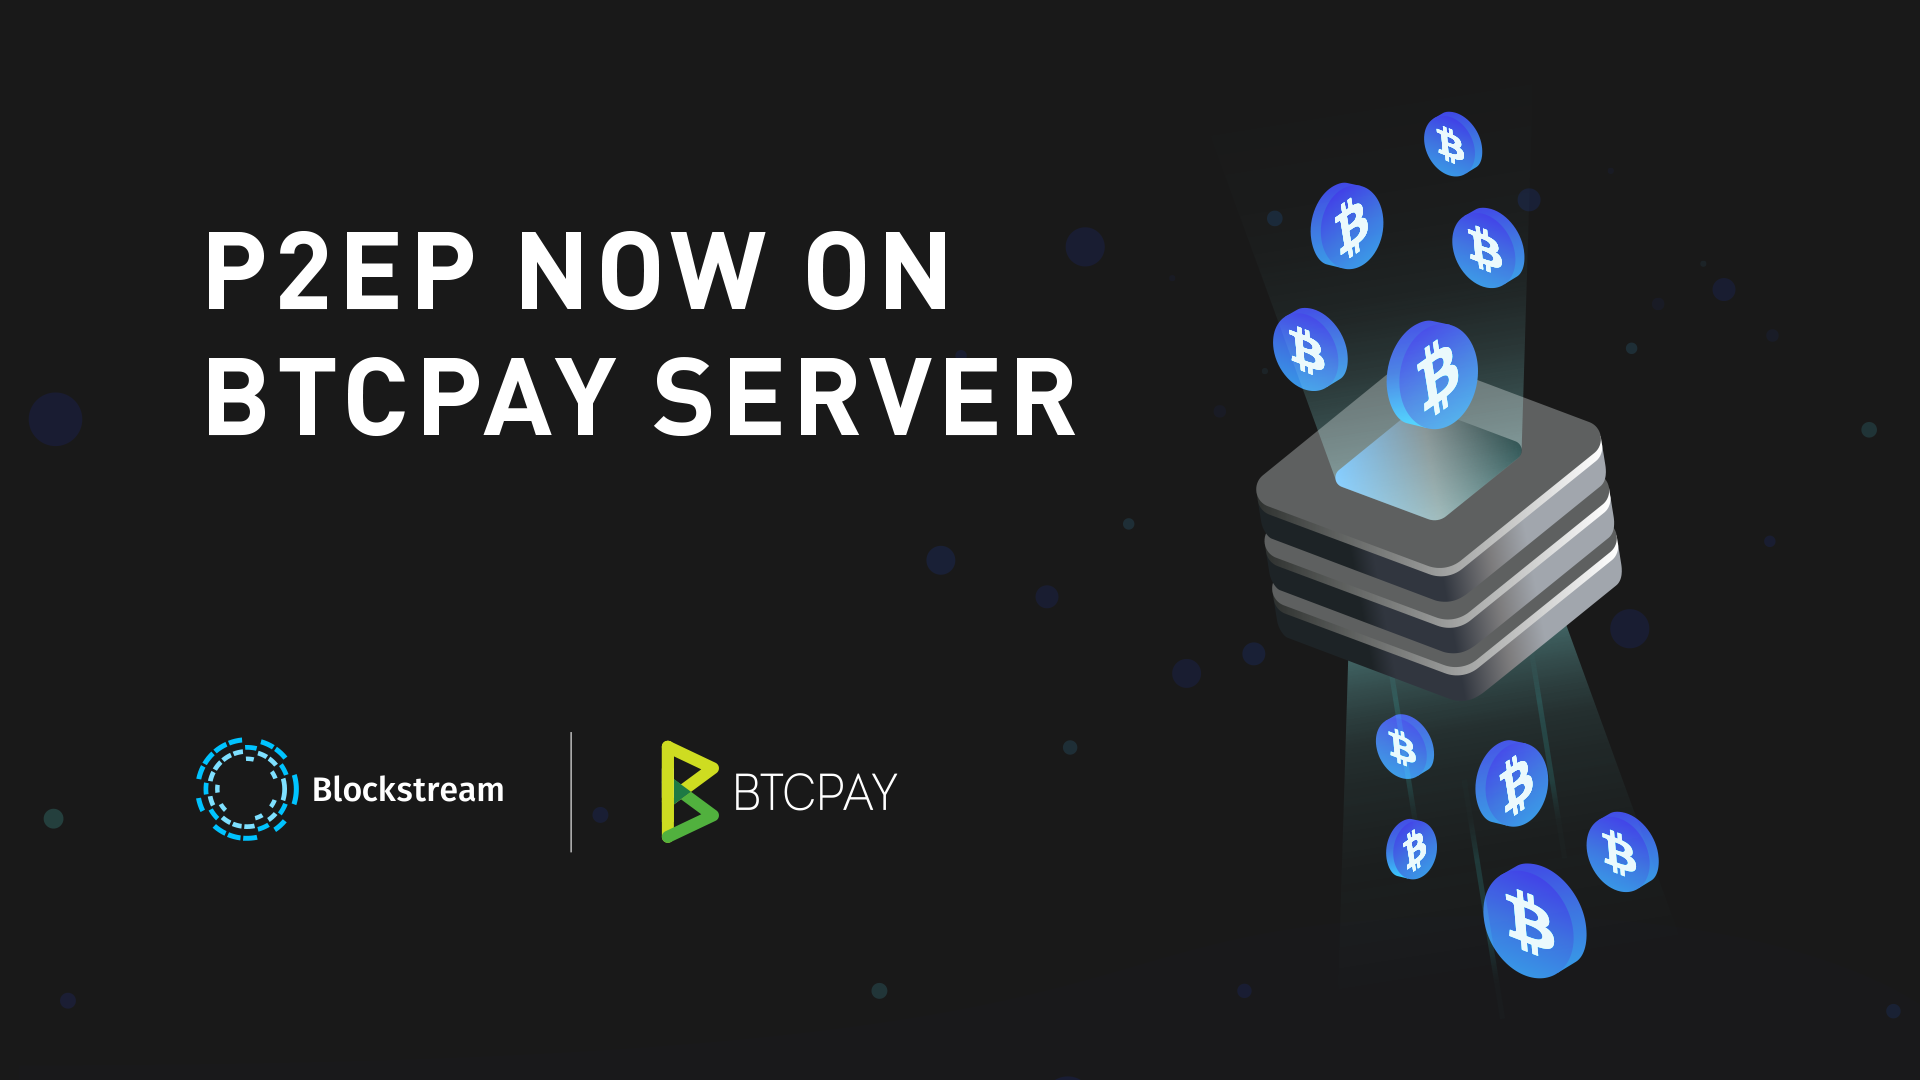 Bitcoin Privacy Improves With BTCPay Server's P2EP Implementation